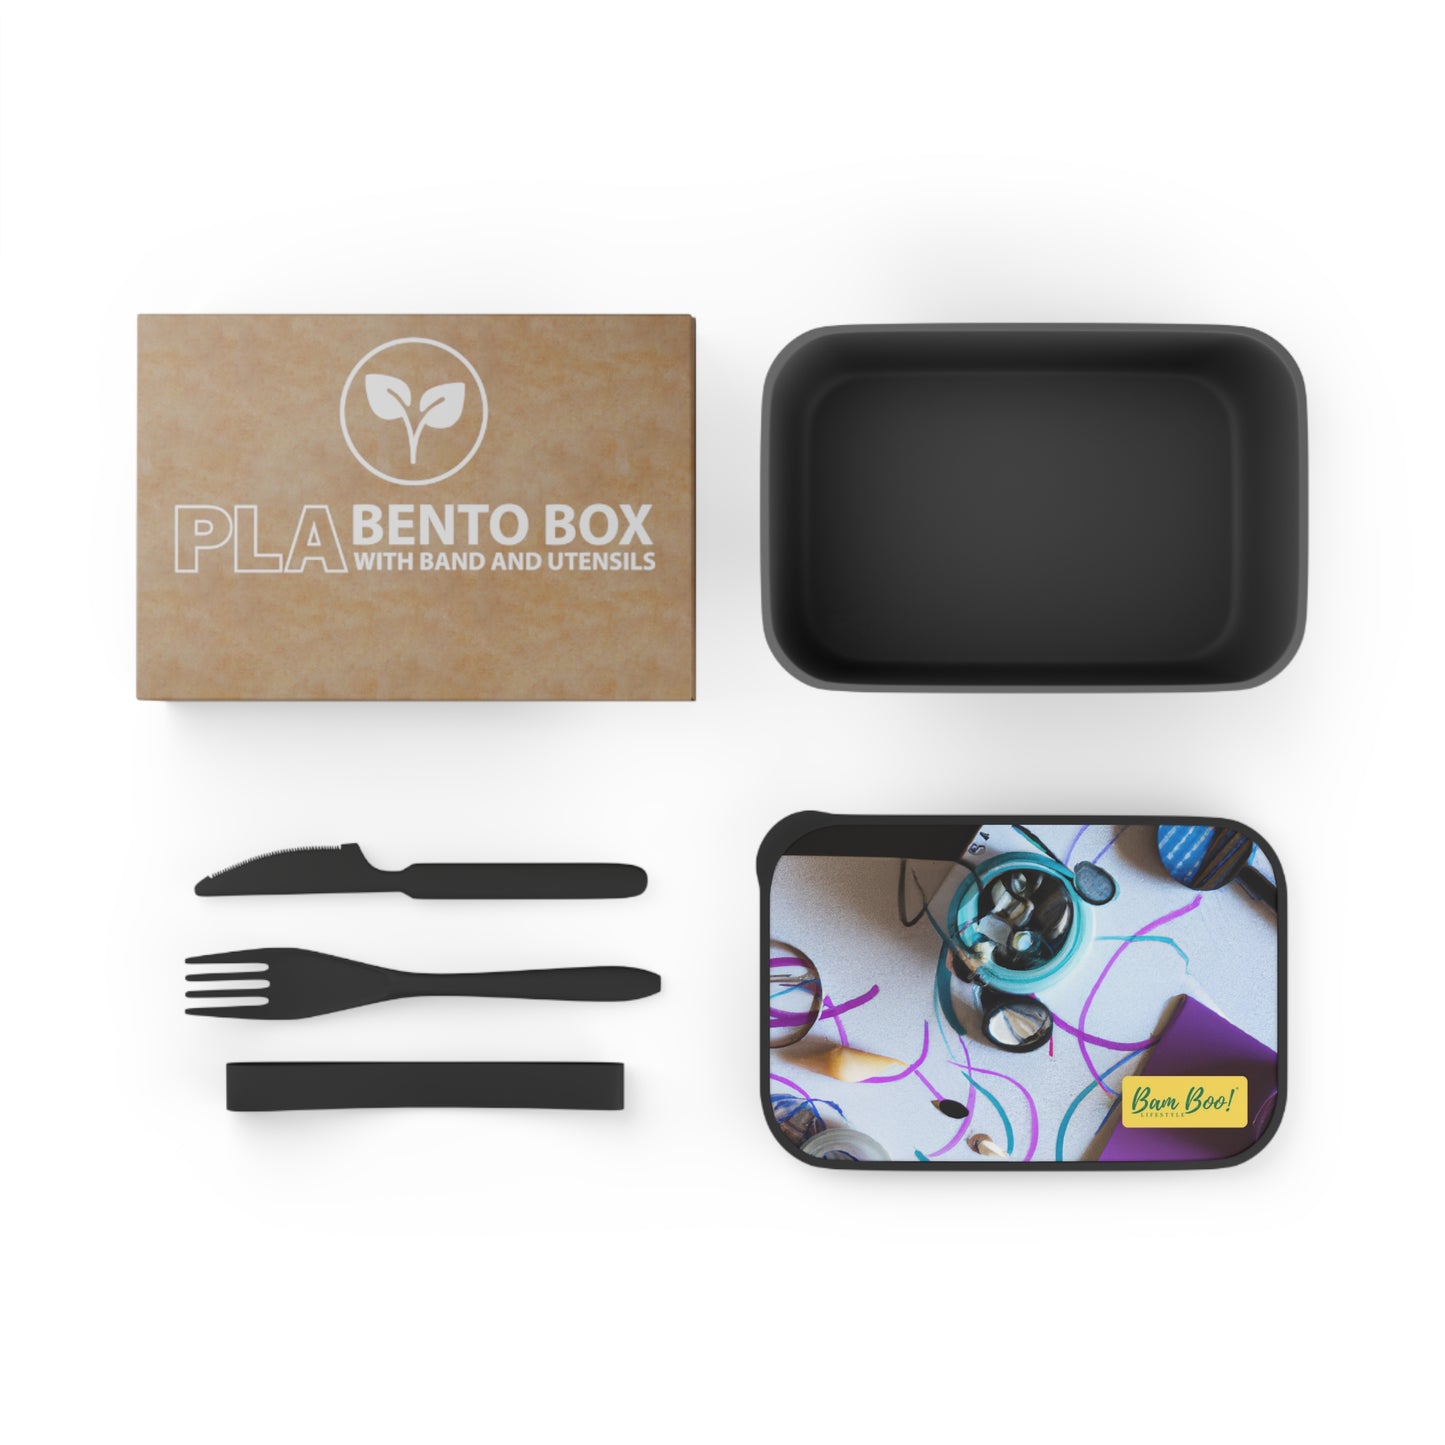 "Dynamic Expressions: Shaping Creative Movement" - Bam Boo! Lifestyle Eco-friendly PLA Bento Box with Band and Utensils